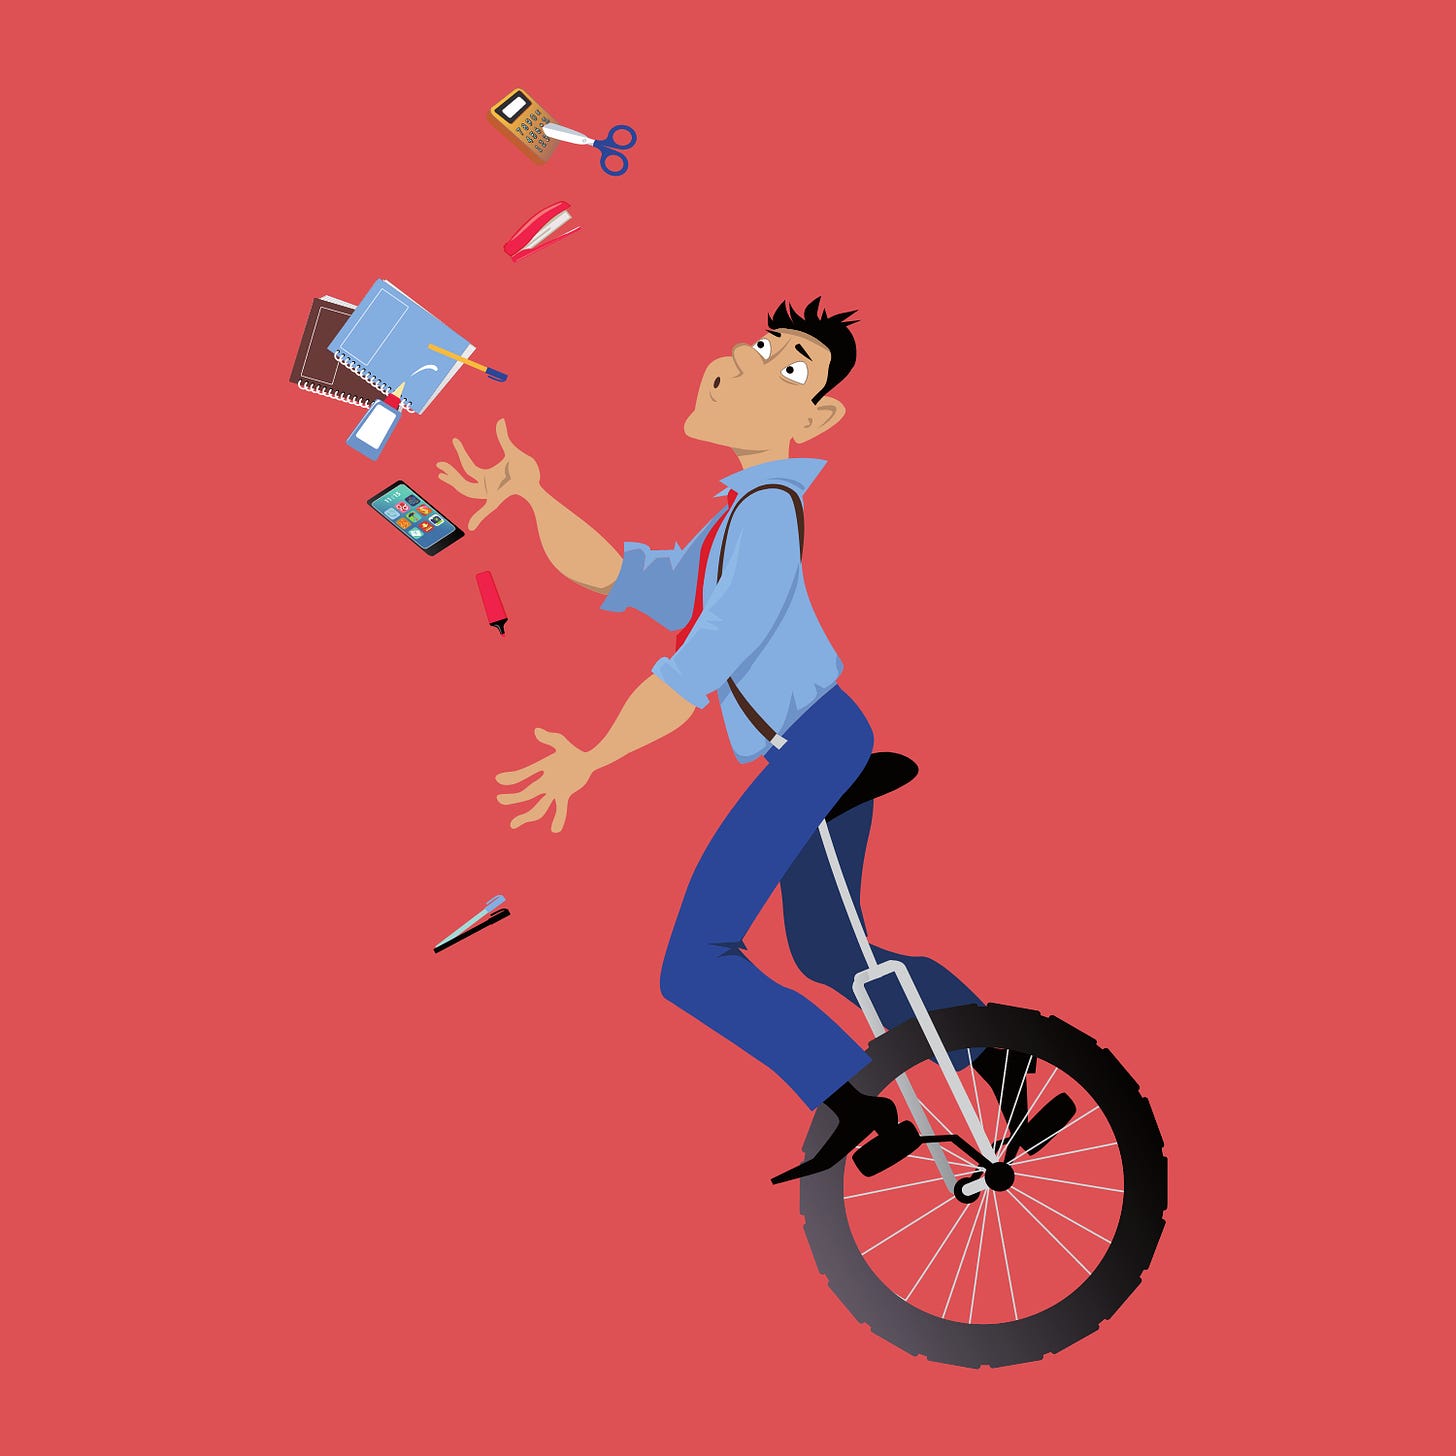 A man wearing workwear on a tricycle trying to juggle many items such as a book, phone, pen, scissors, calculator, etc